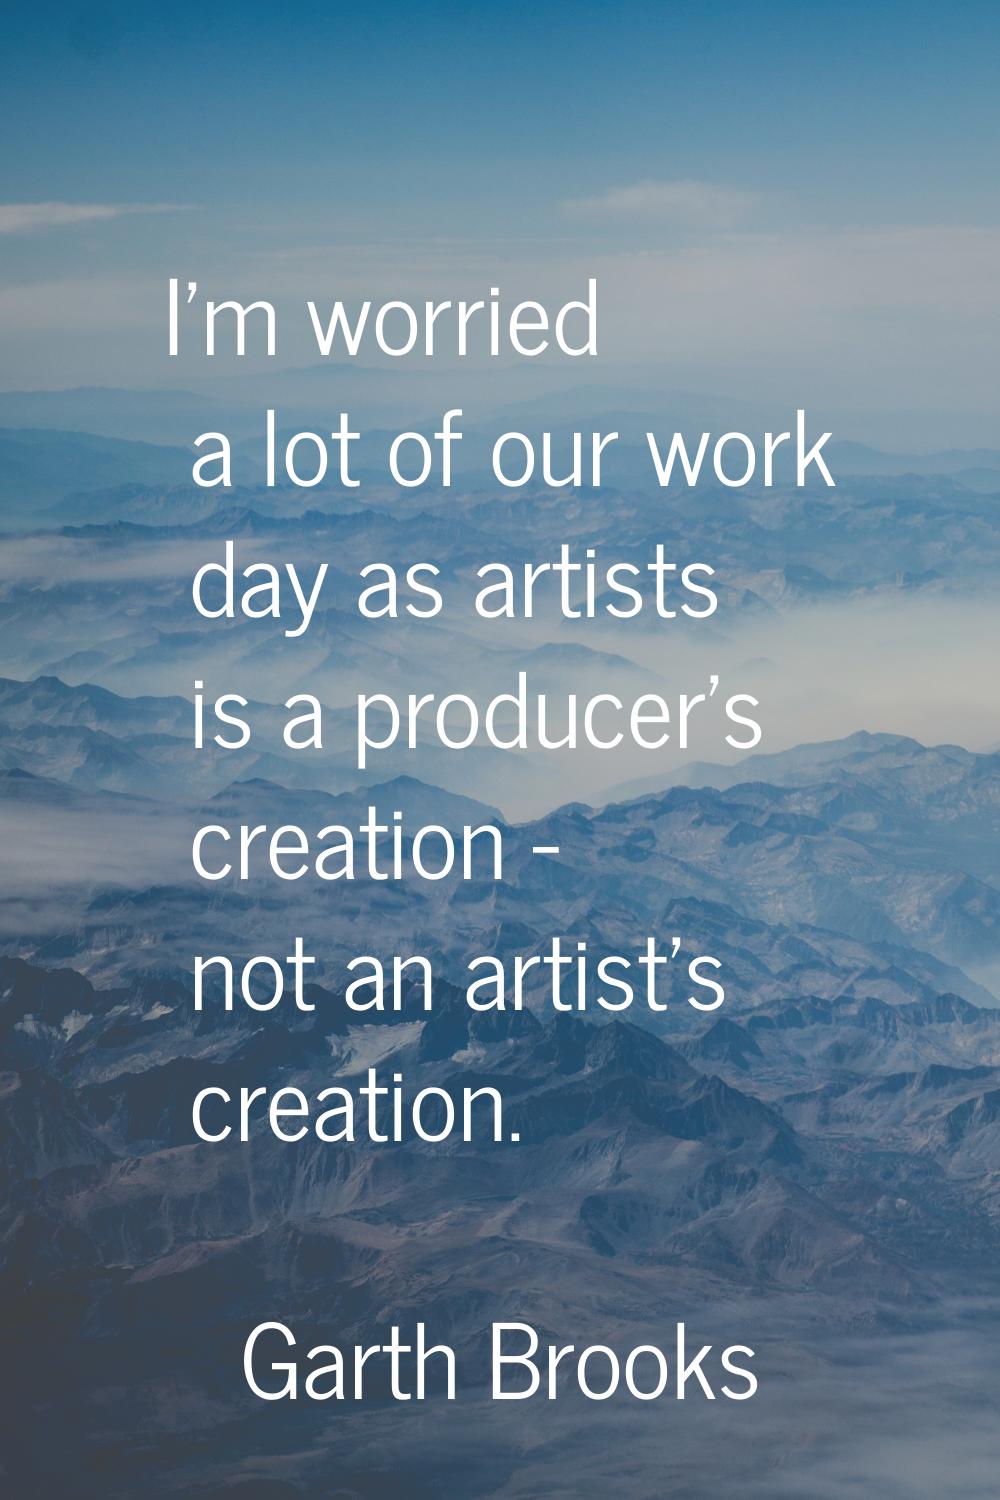 I'm worried a lot of our work day as artists is a producer's creation - not an artist's creation.